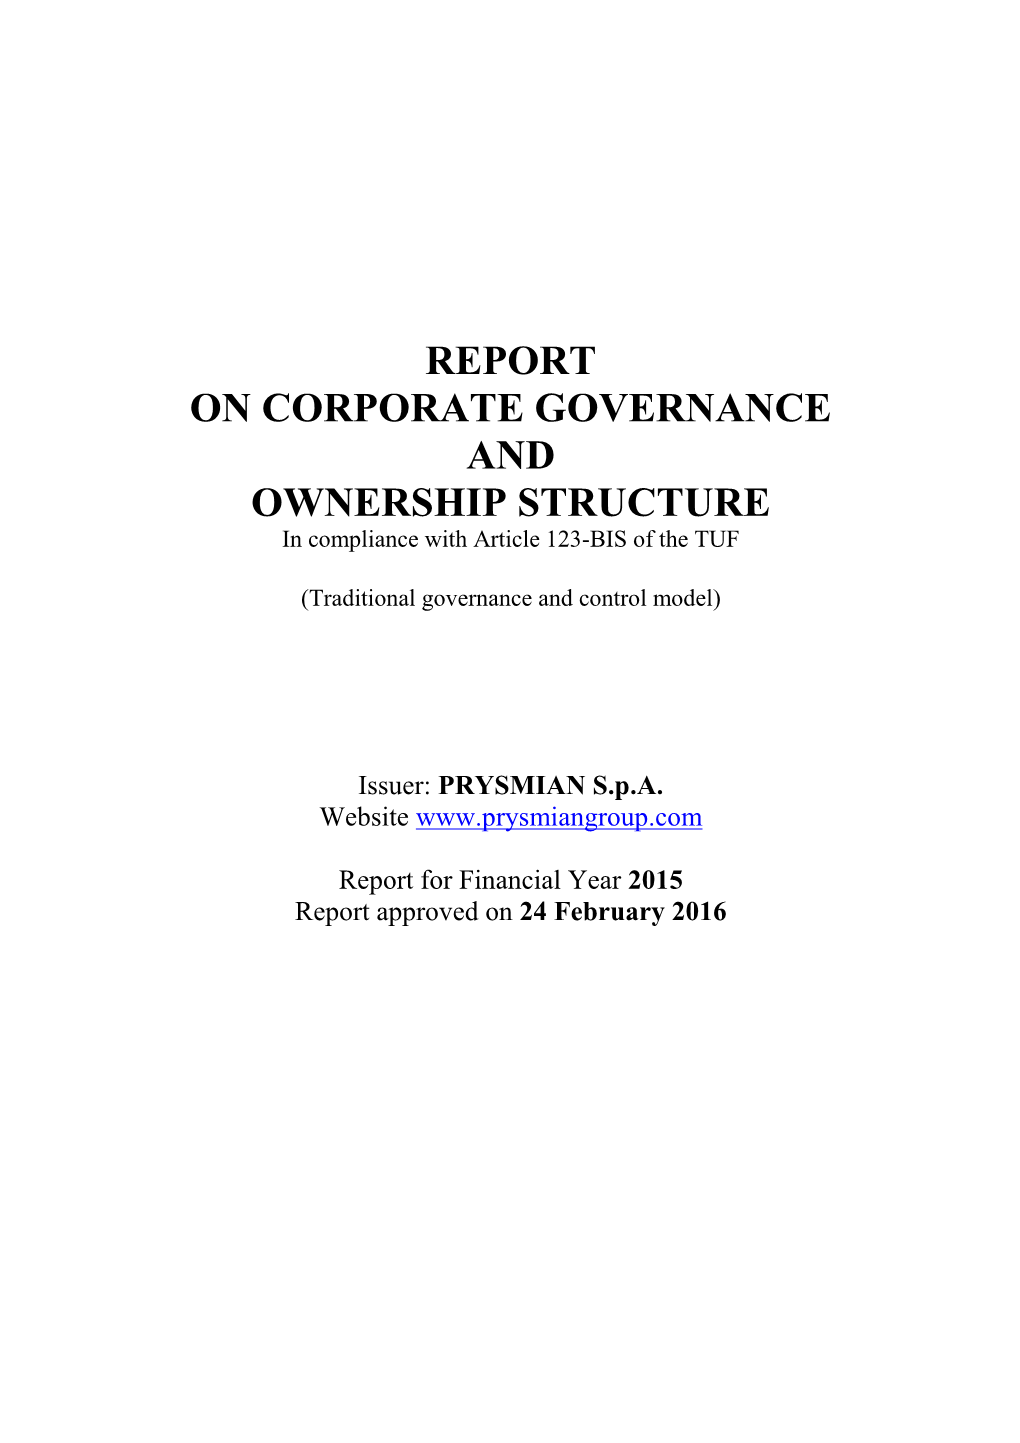 REPORT on CORPORATE GOVERNANCE and OWNERSHIP STRUCTURE in Compliance with Article 123-BIS of the TUF